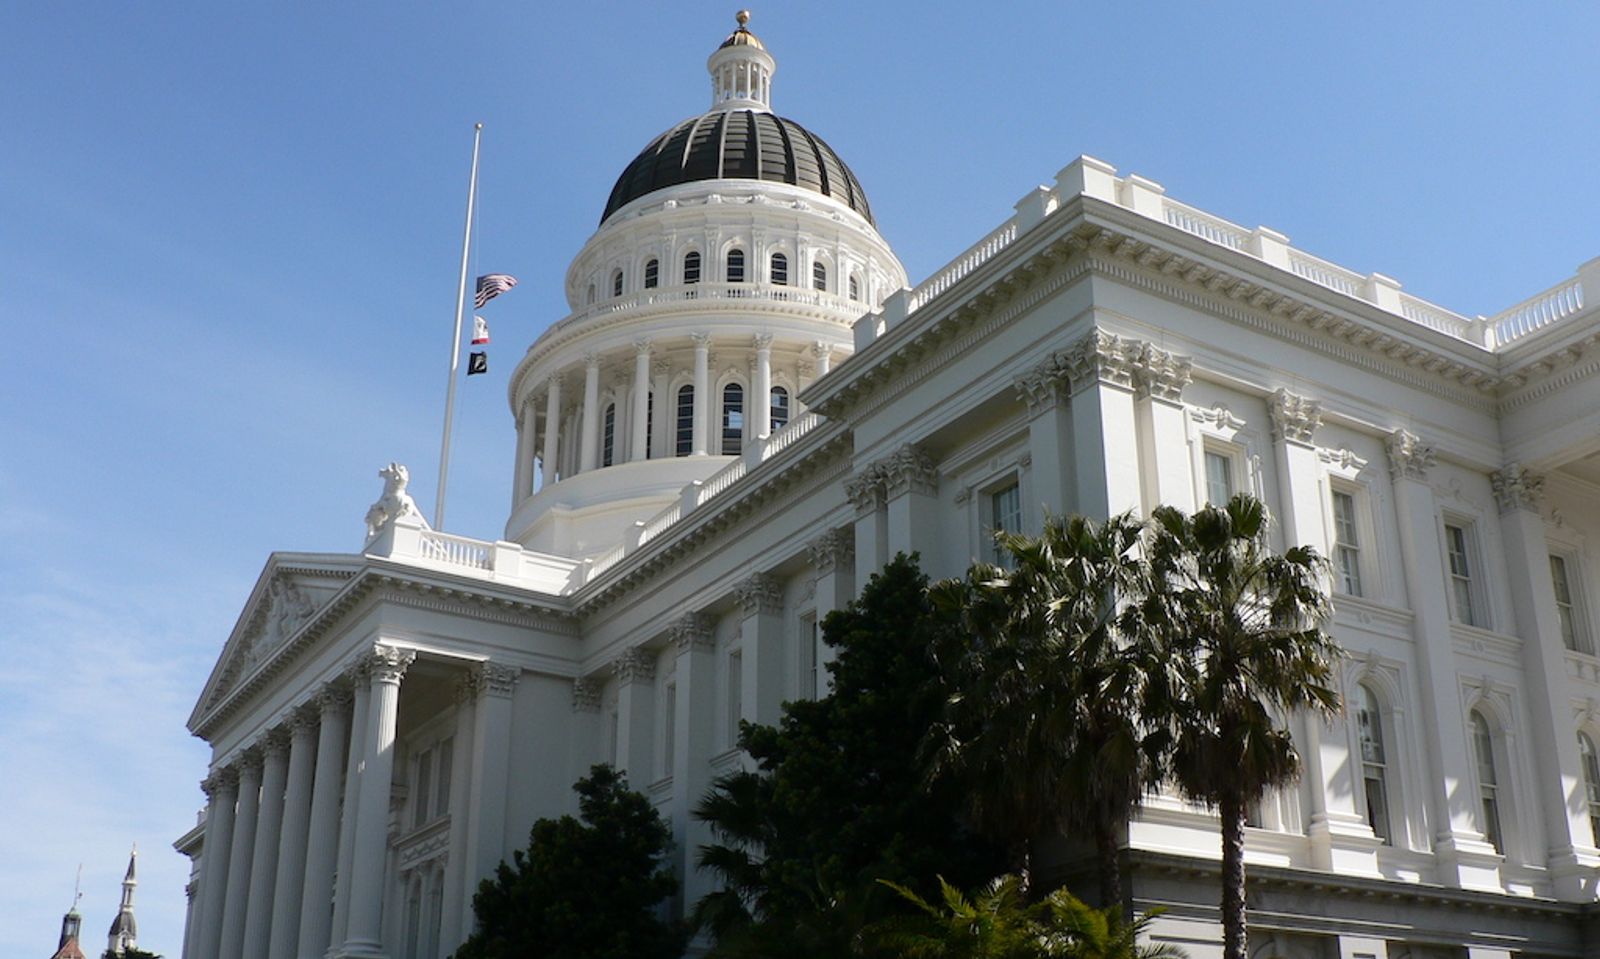 California Law Making Sex Workers ‘Immune’ From Arrest Nears Vote